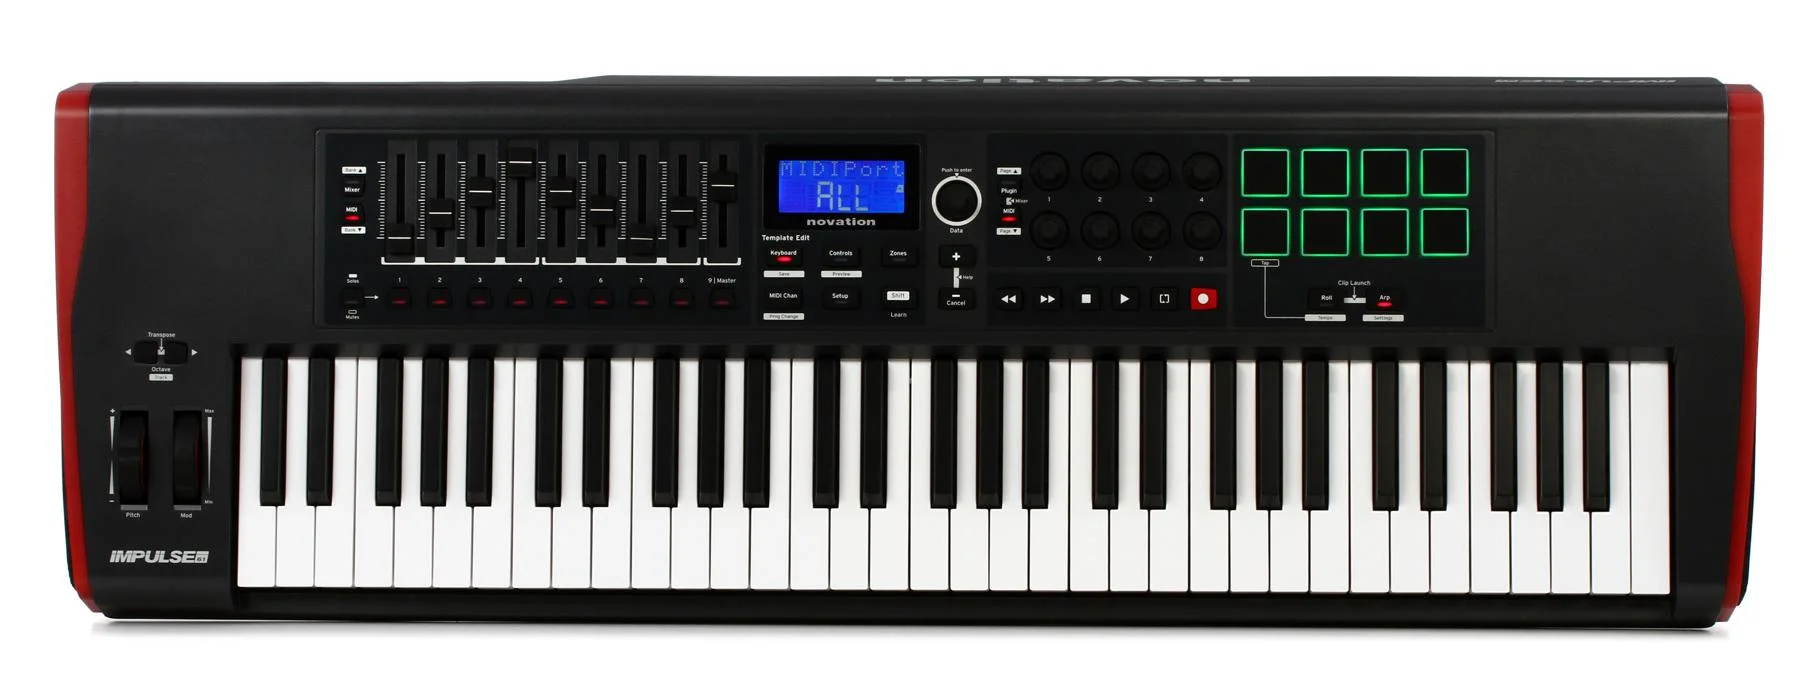 Sos Forum Midi Controller With Assignable Dynamic Knobs